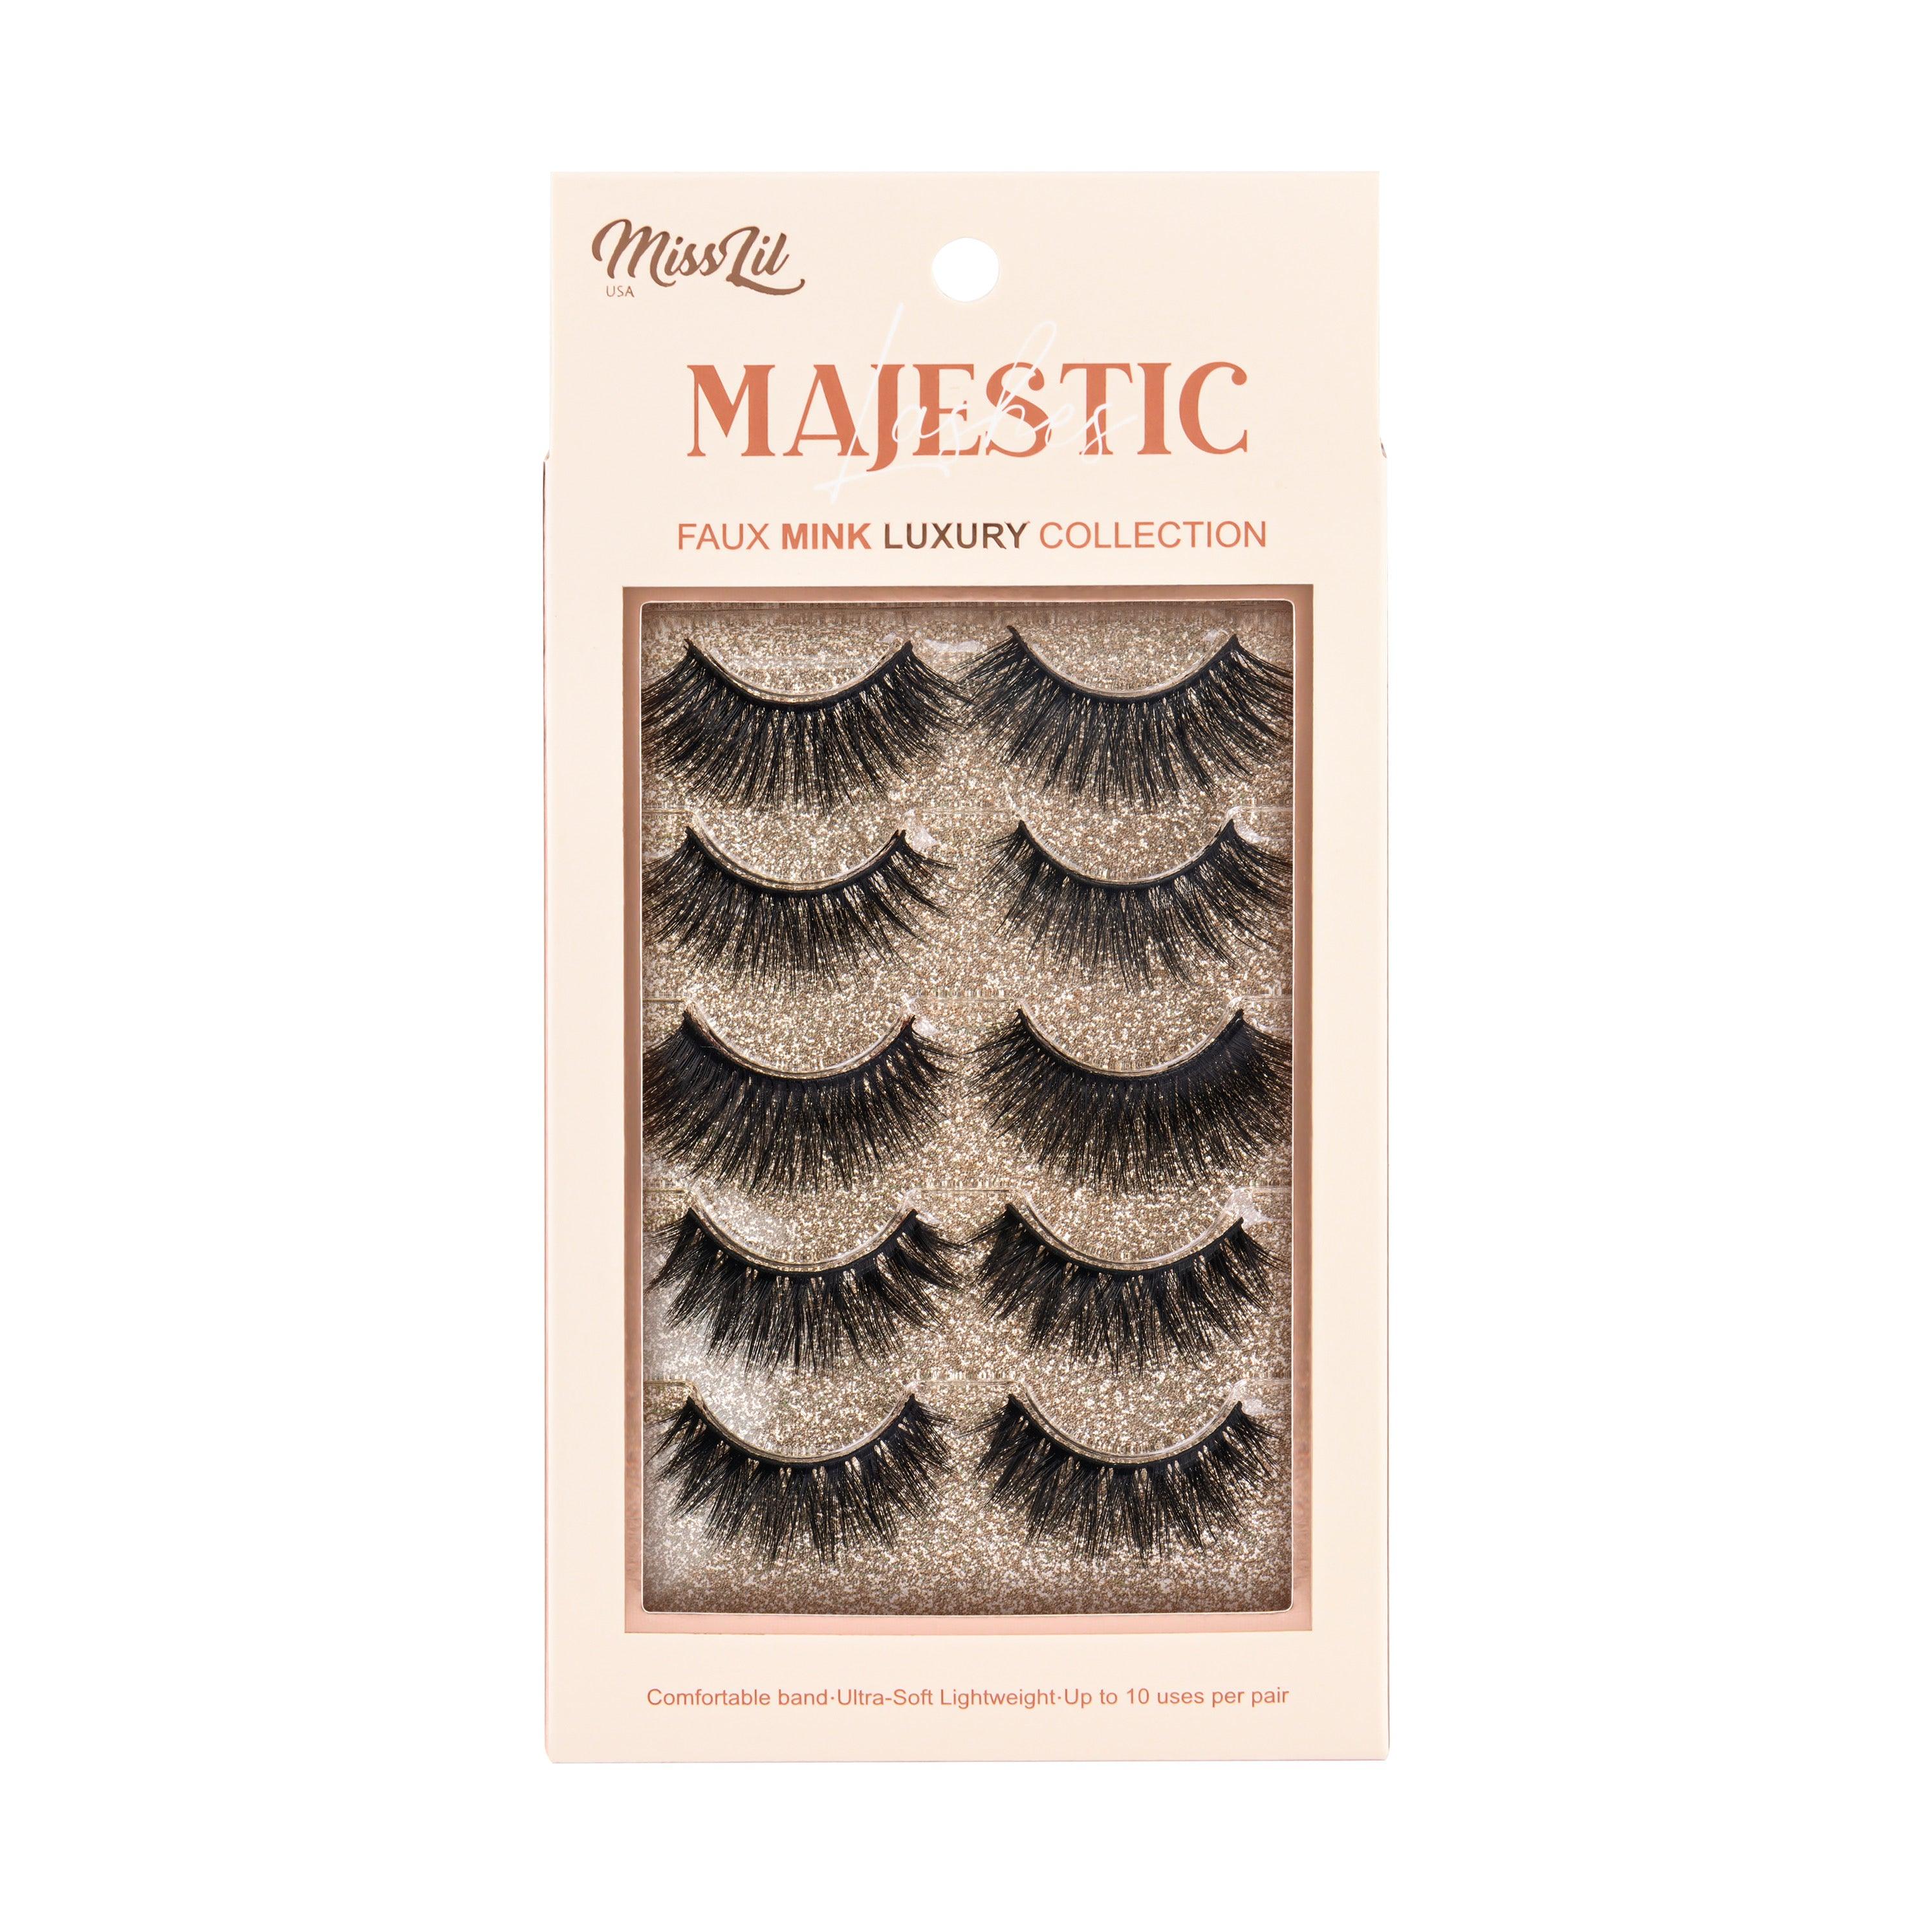 5 Pairs Majestic Lashes #11 (Pack of 6) - Miss Lil USA Wholesale